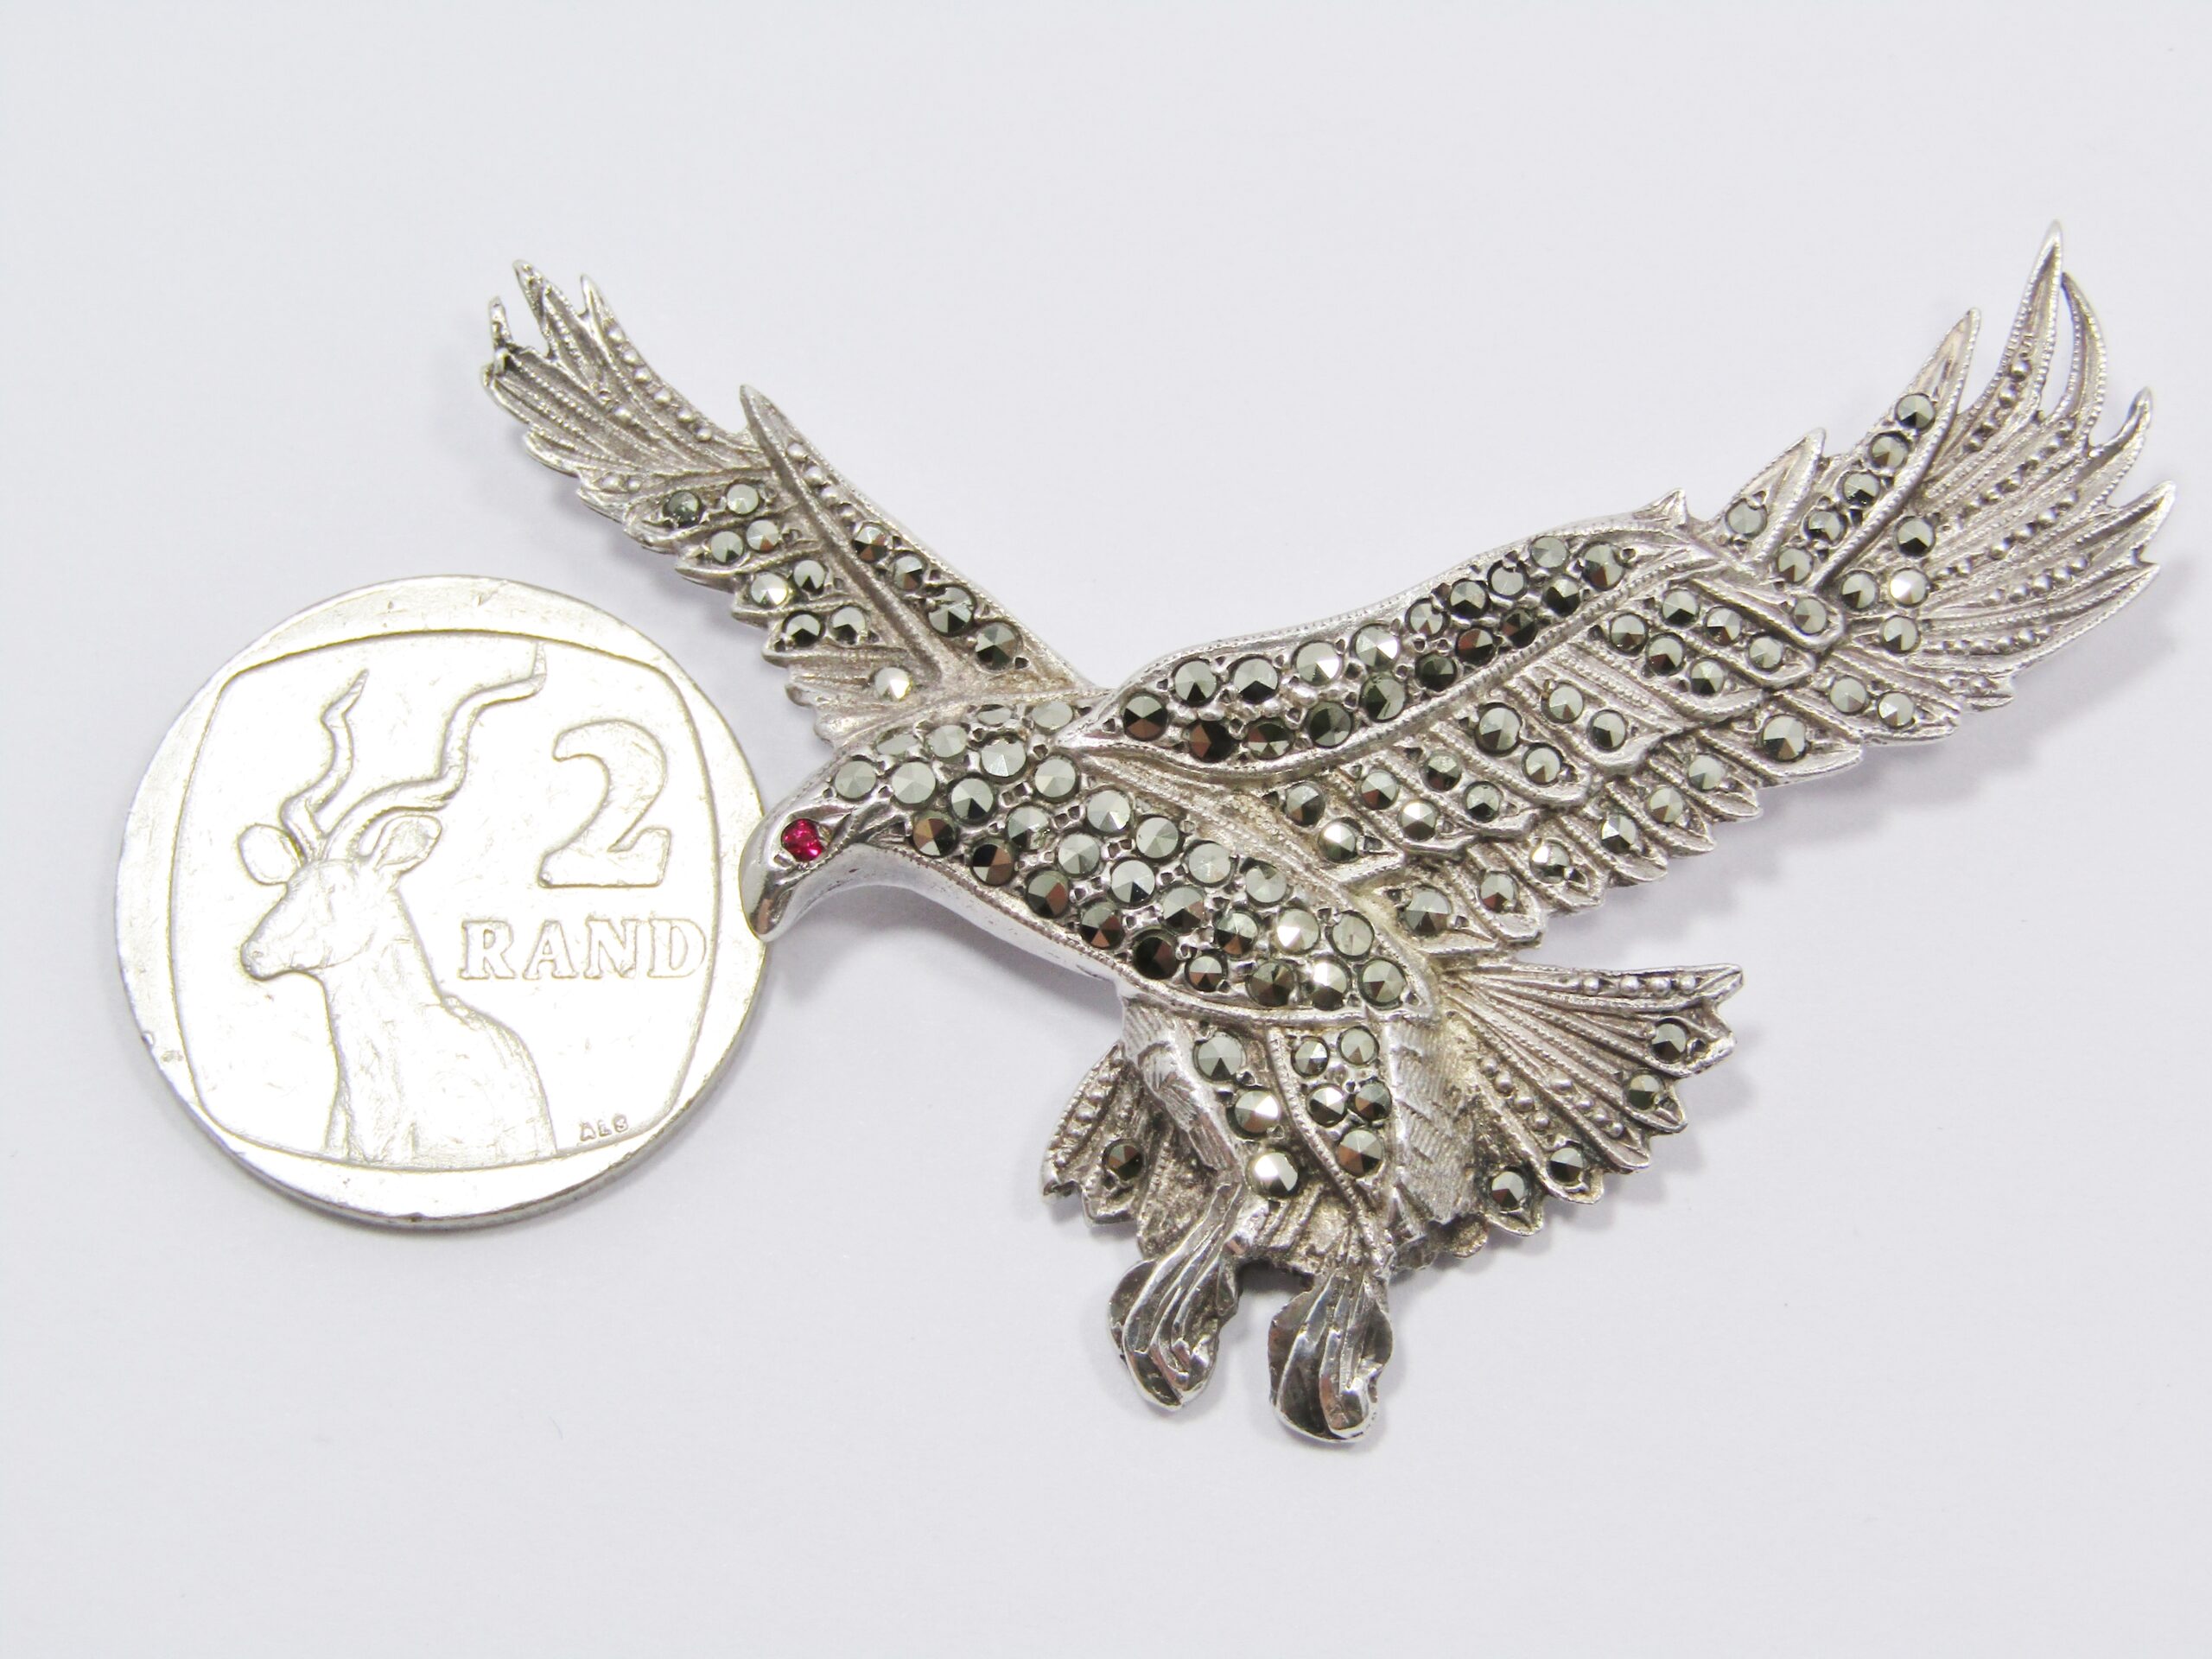 An Amazing Medium Size Eagle in Flight Brooch With Marcasite’s in Sterling Silver